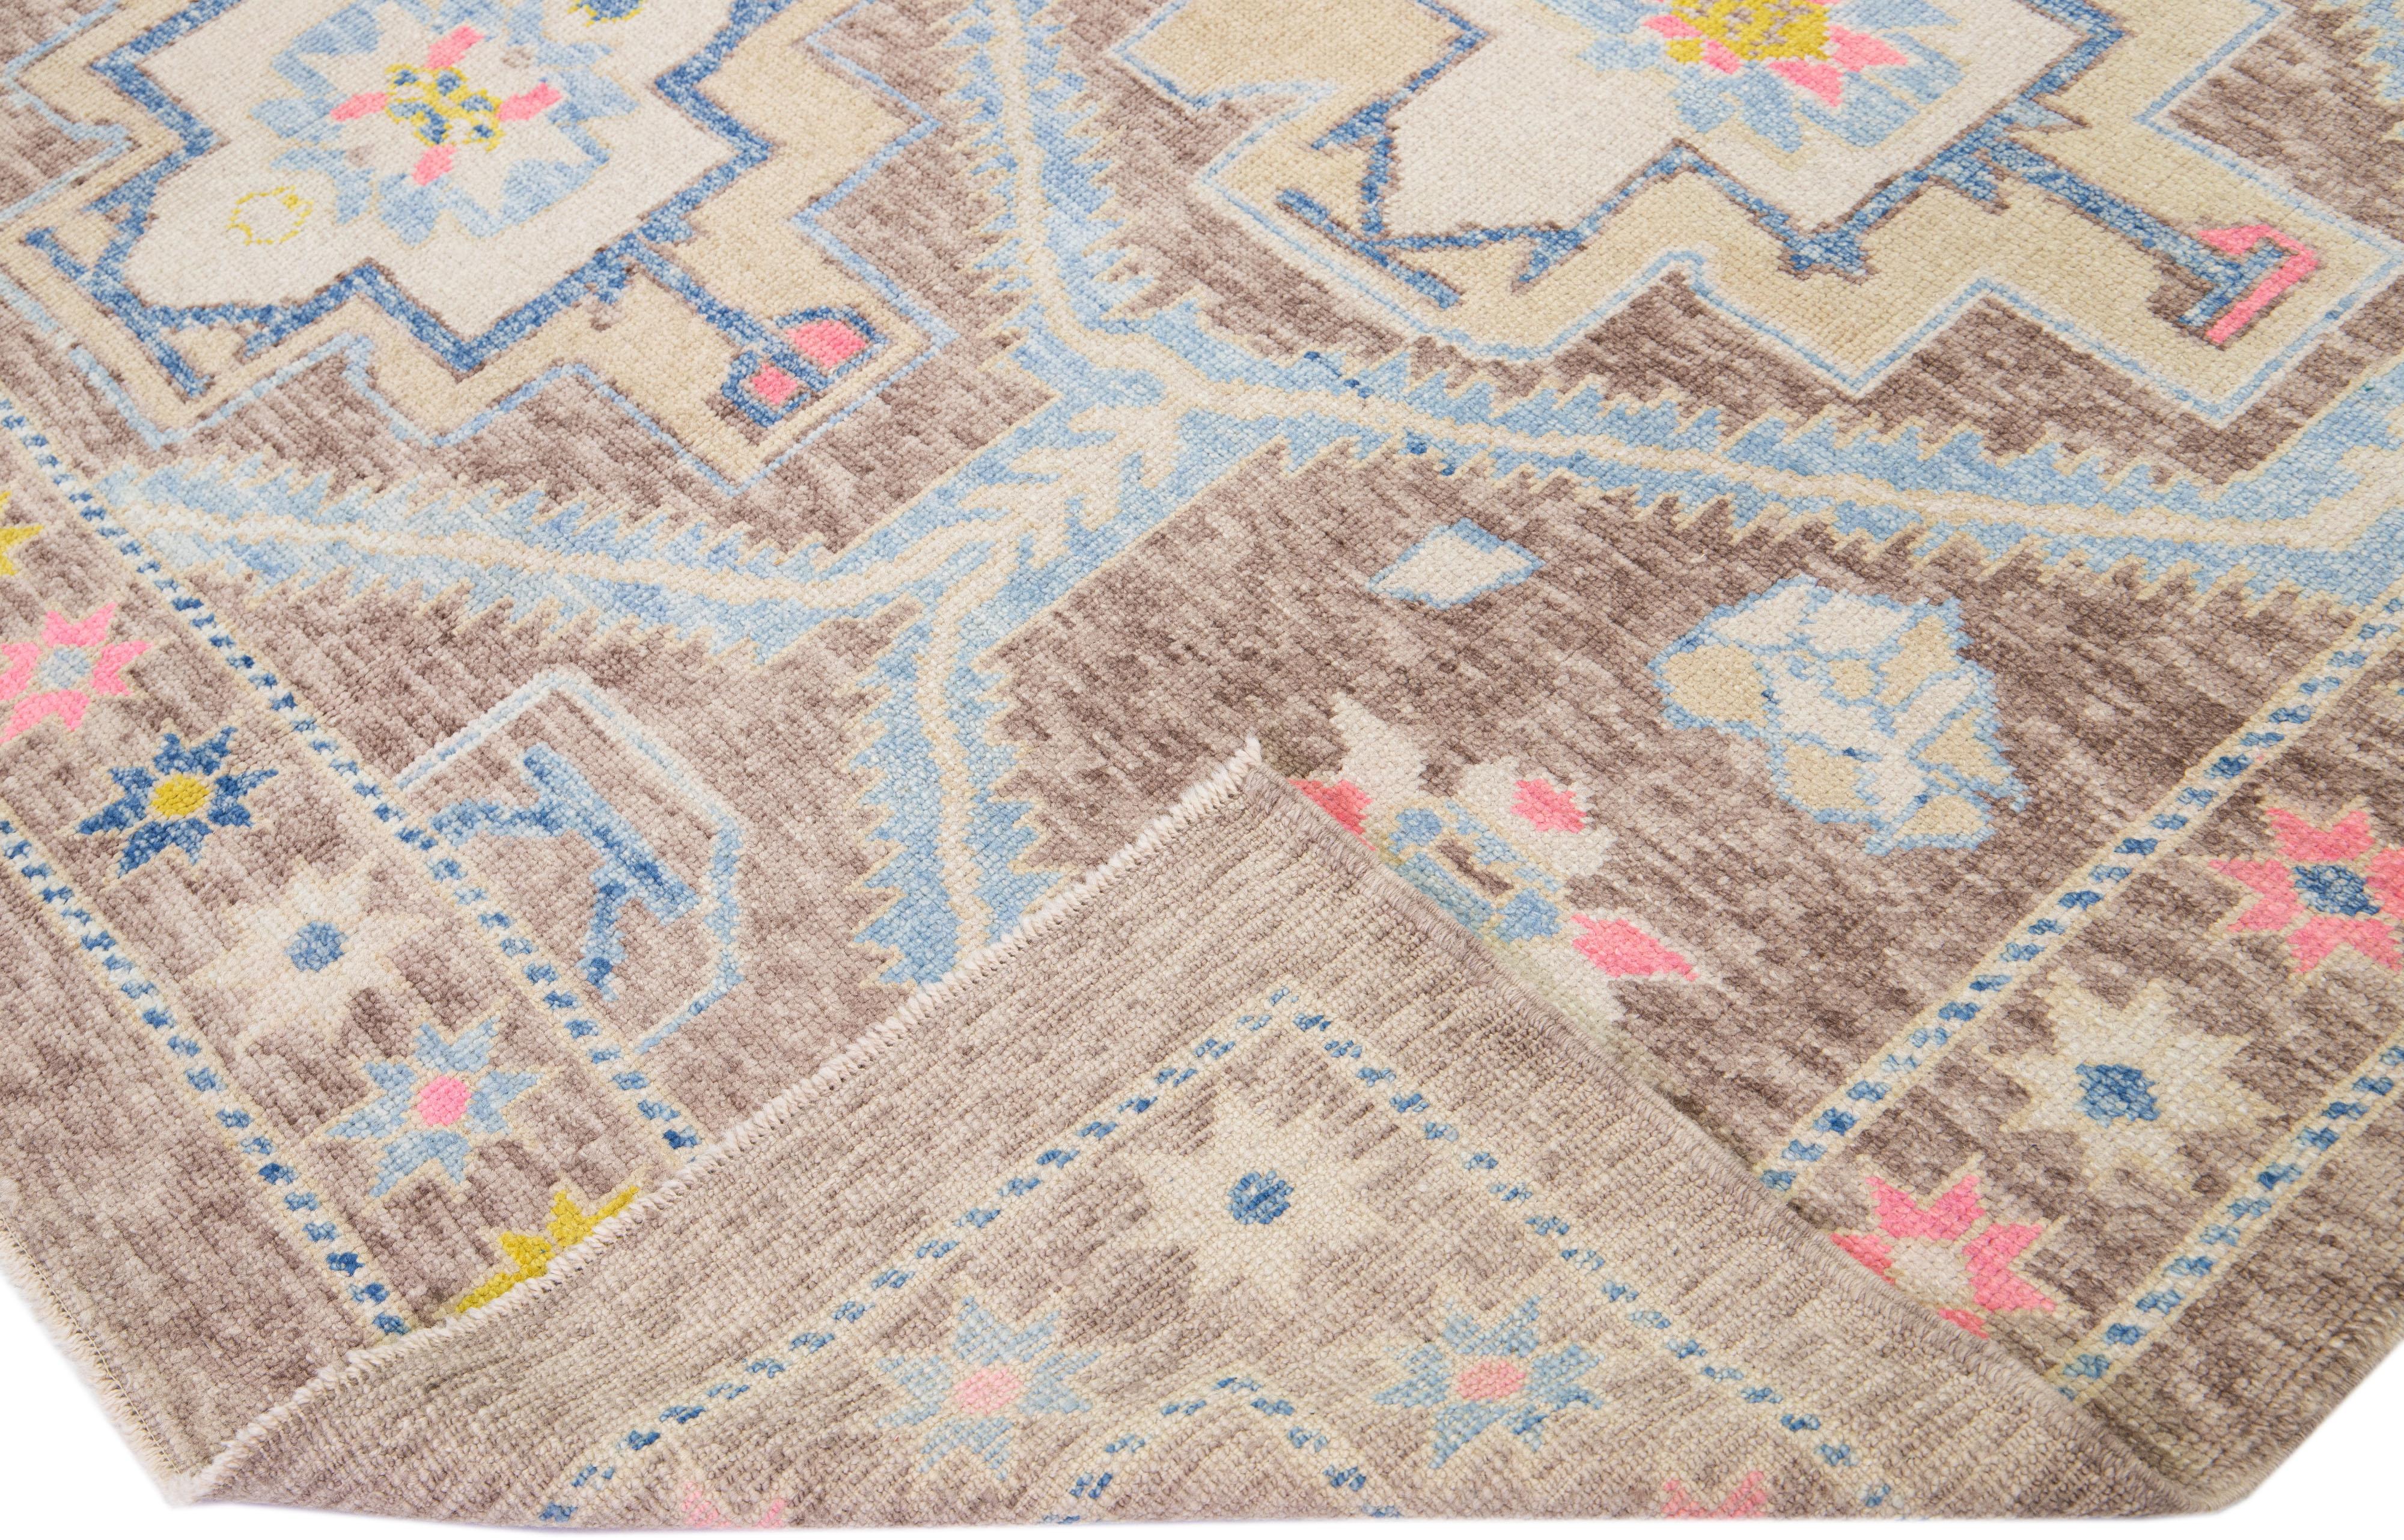 Beautiful modern Turkish hand-knotted wool rug with a brown color field and blue, pink, and beige accents in a gorgeous all-over geometric floral design.

This rug measures: 9'4